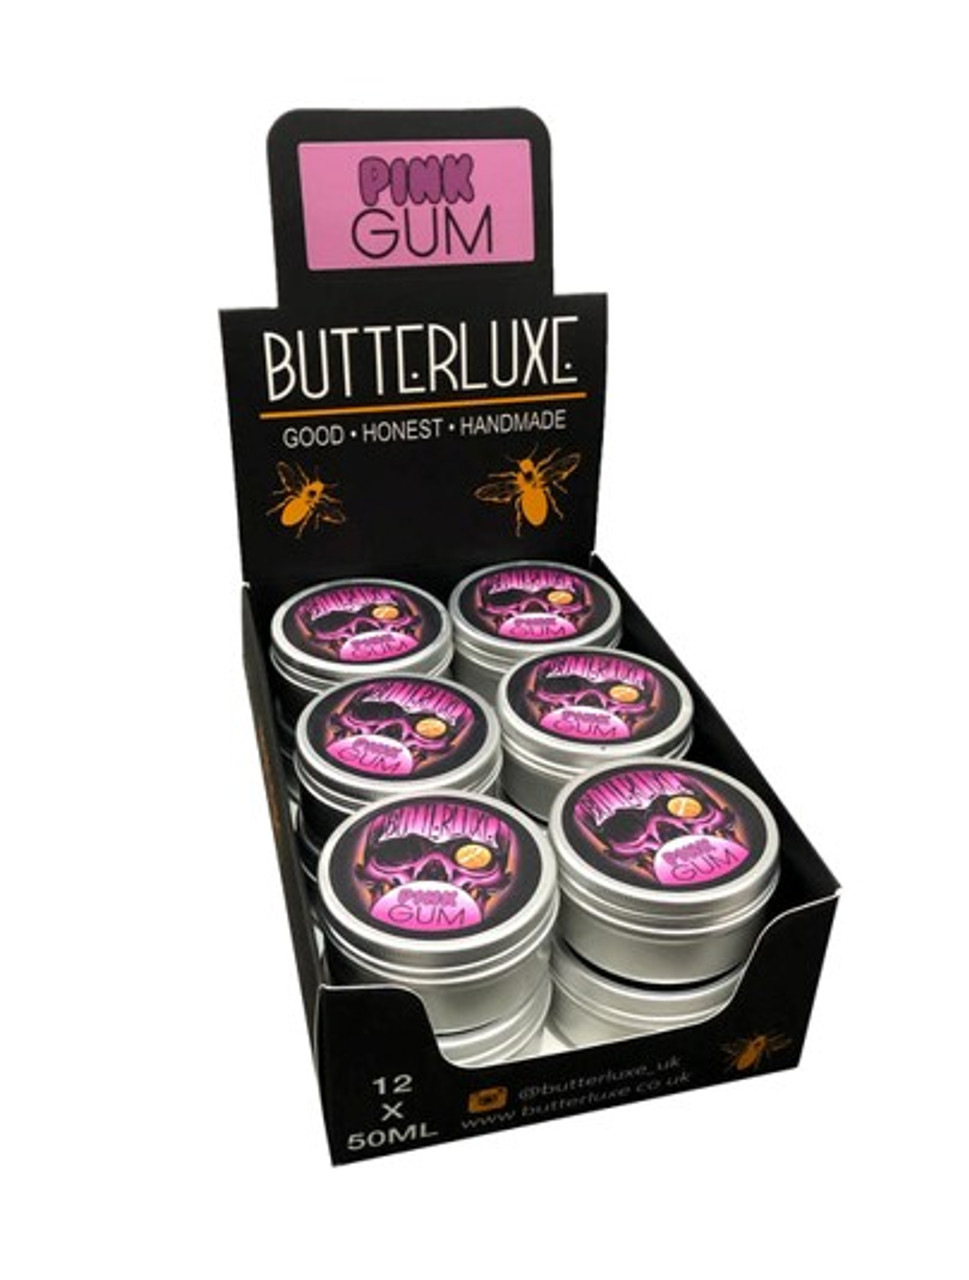 Butterluxe Limited Reviews  Read Customer Service Reviews of